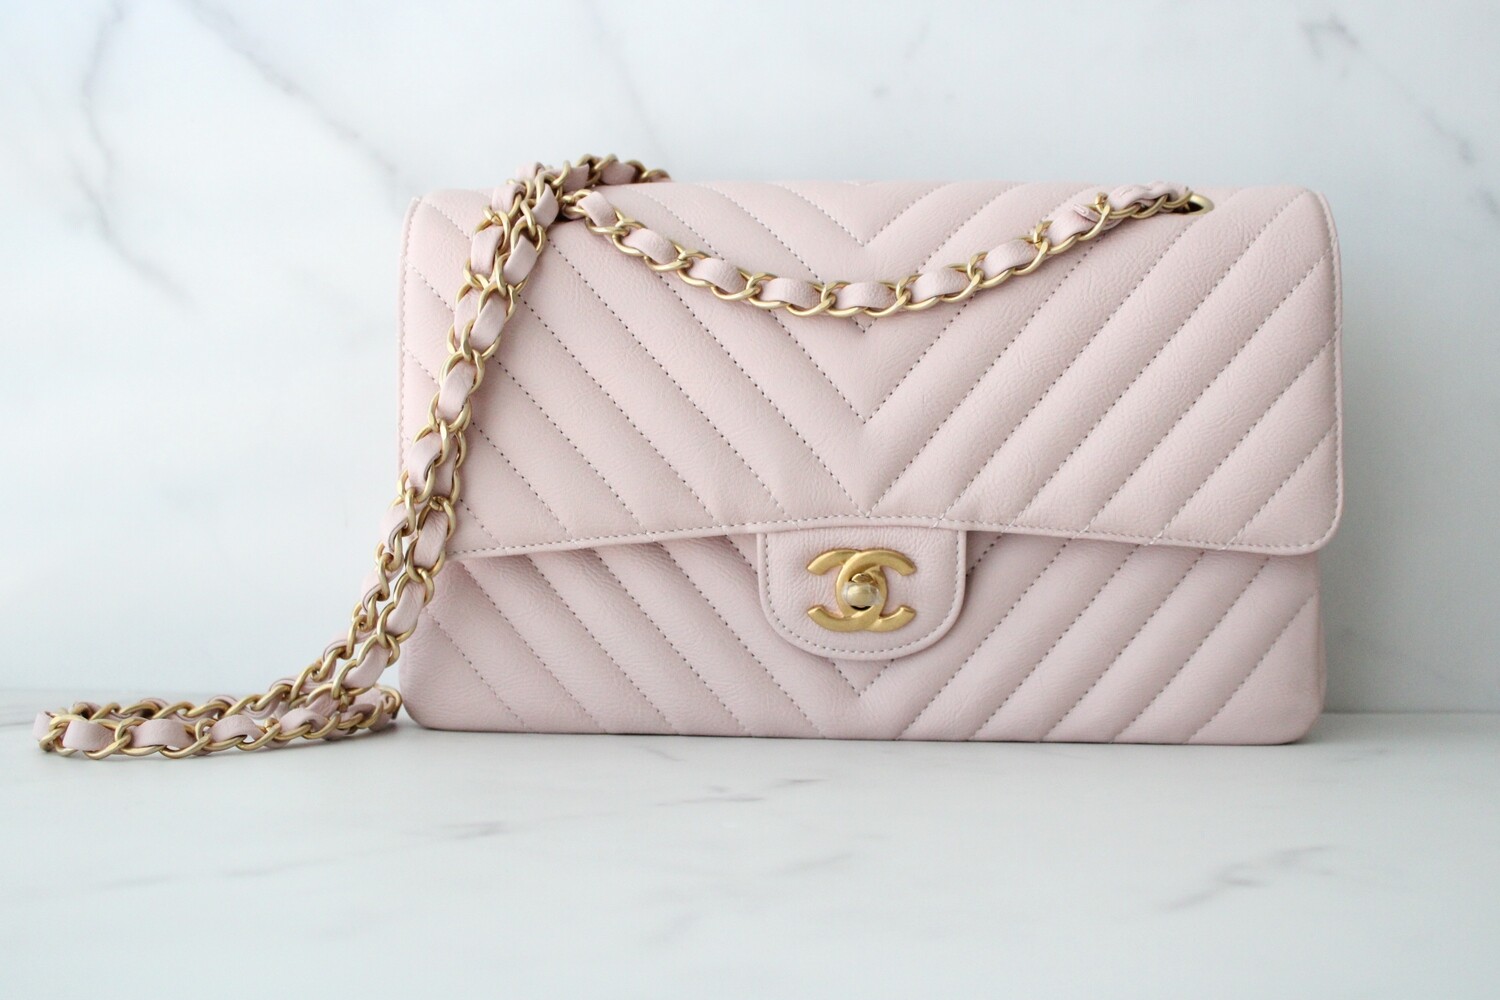 Chanel Classic Medium Double Flap, 17c Light Pink Calfskin Leather, Brushed  Gold Hardware, Preowned in Dustbag